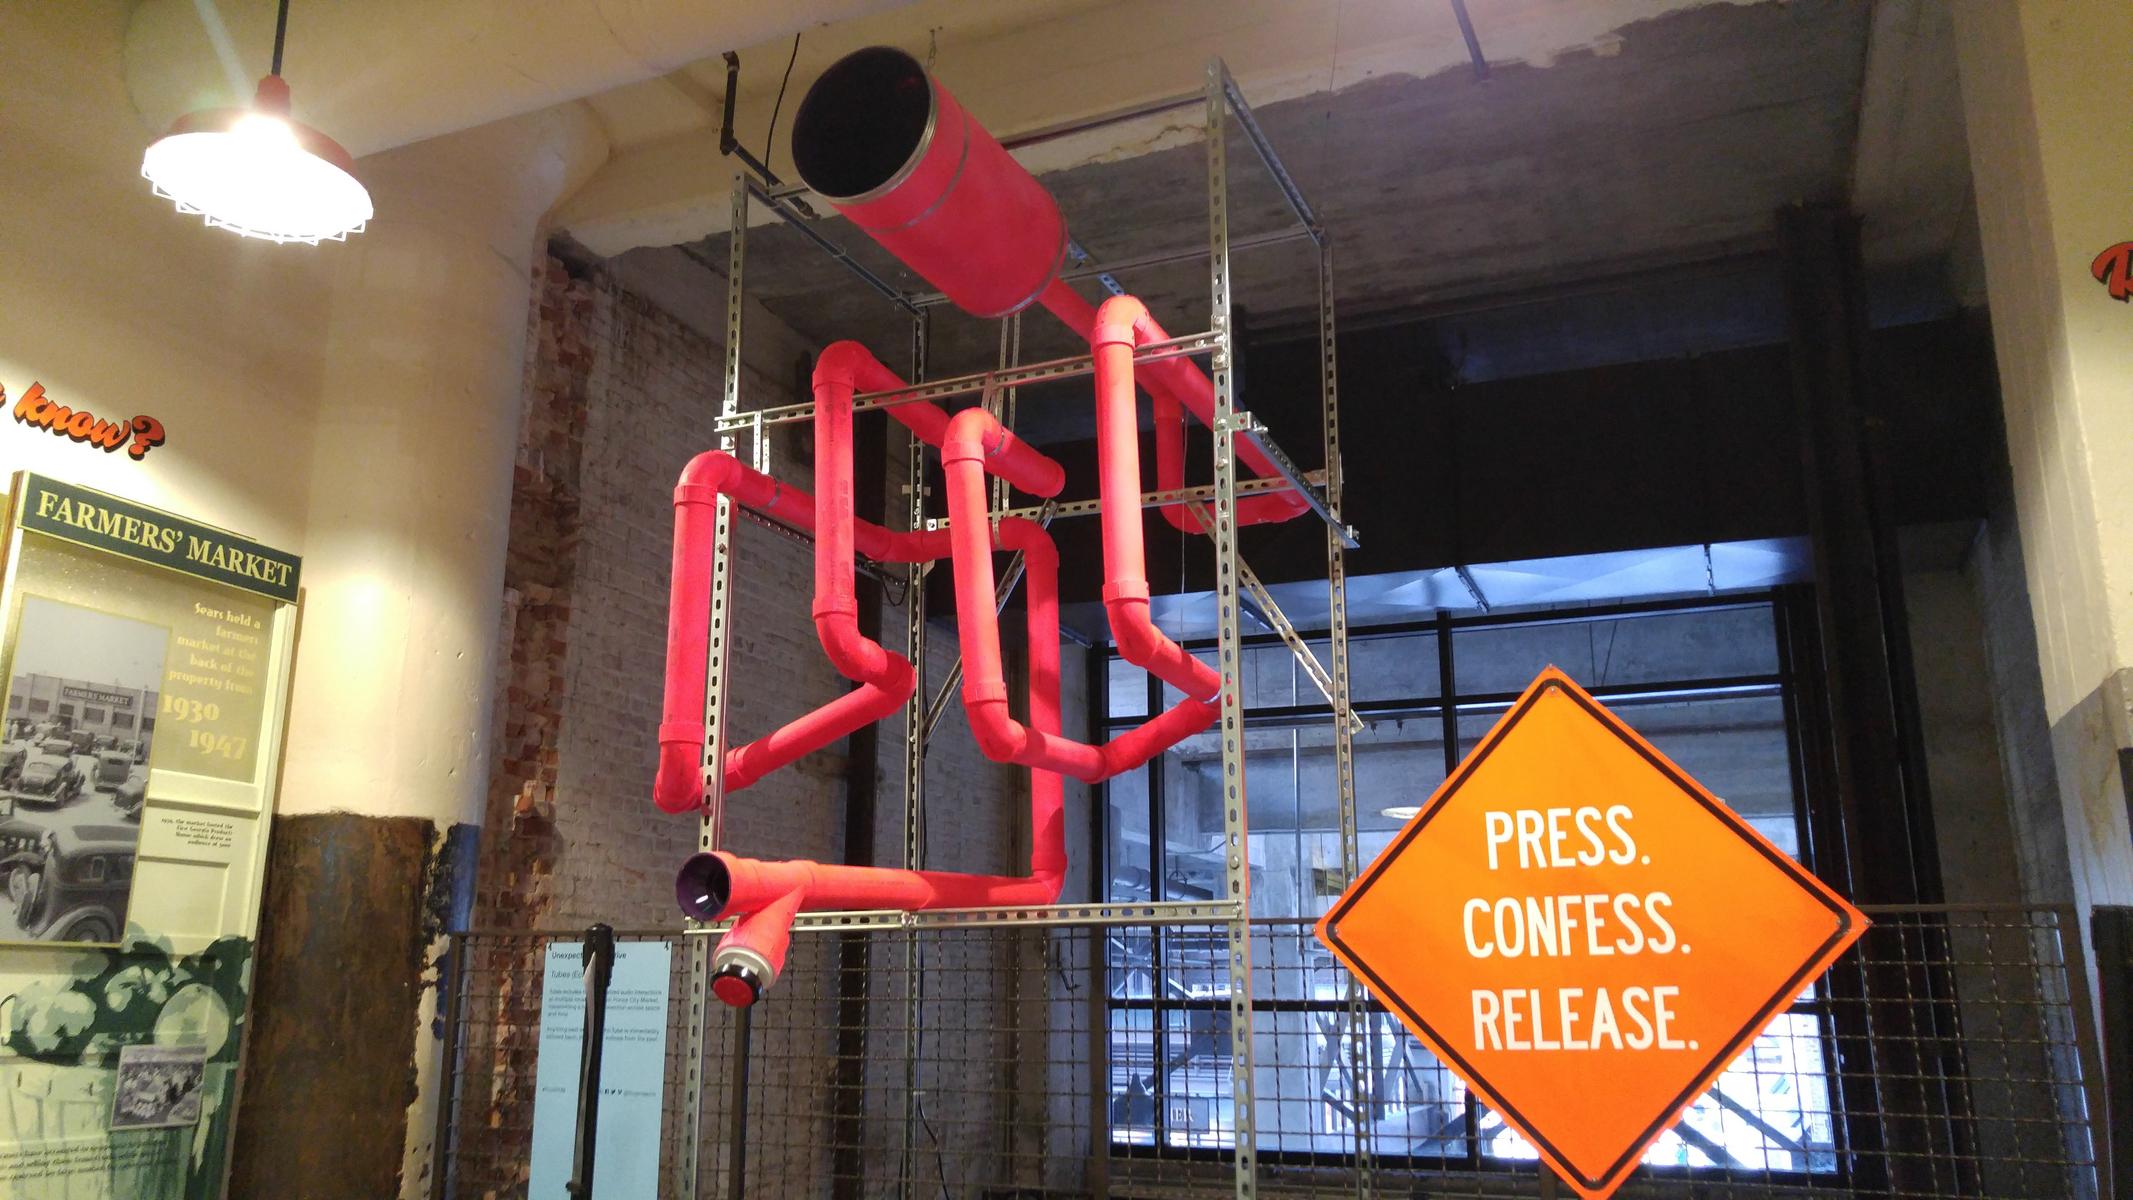 A photograph of the Echo Tube interactive sound installation: a series of fluorescent pink tubes with a red button attached. A construction-style sign instructs visitors to 'Press. Confess. Release.'